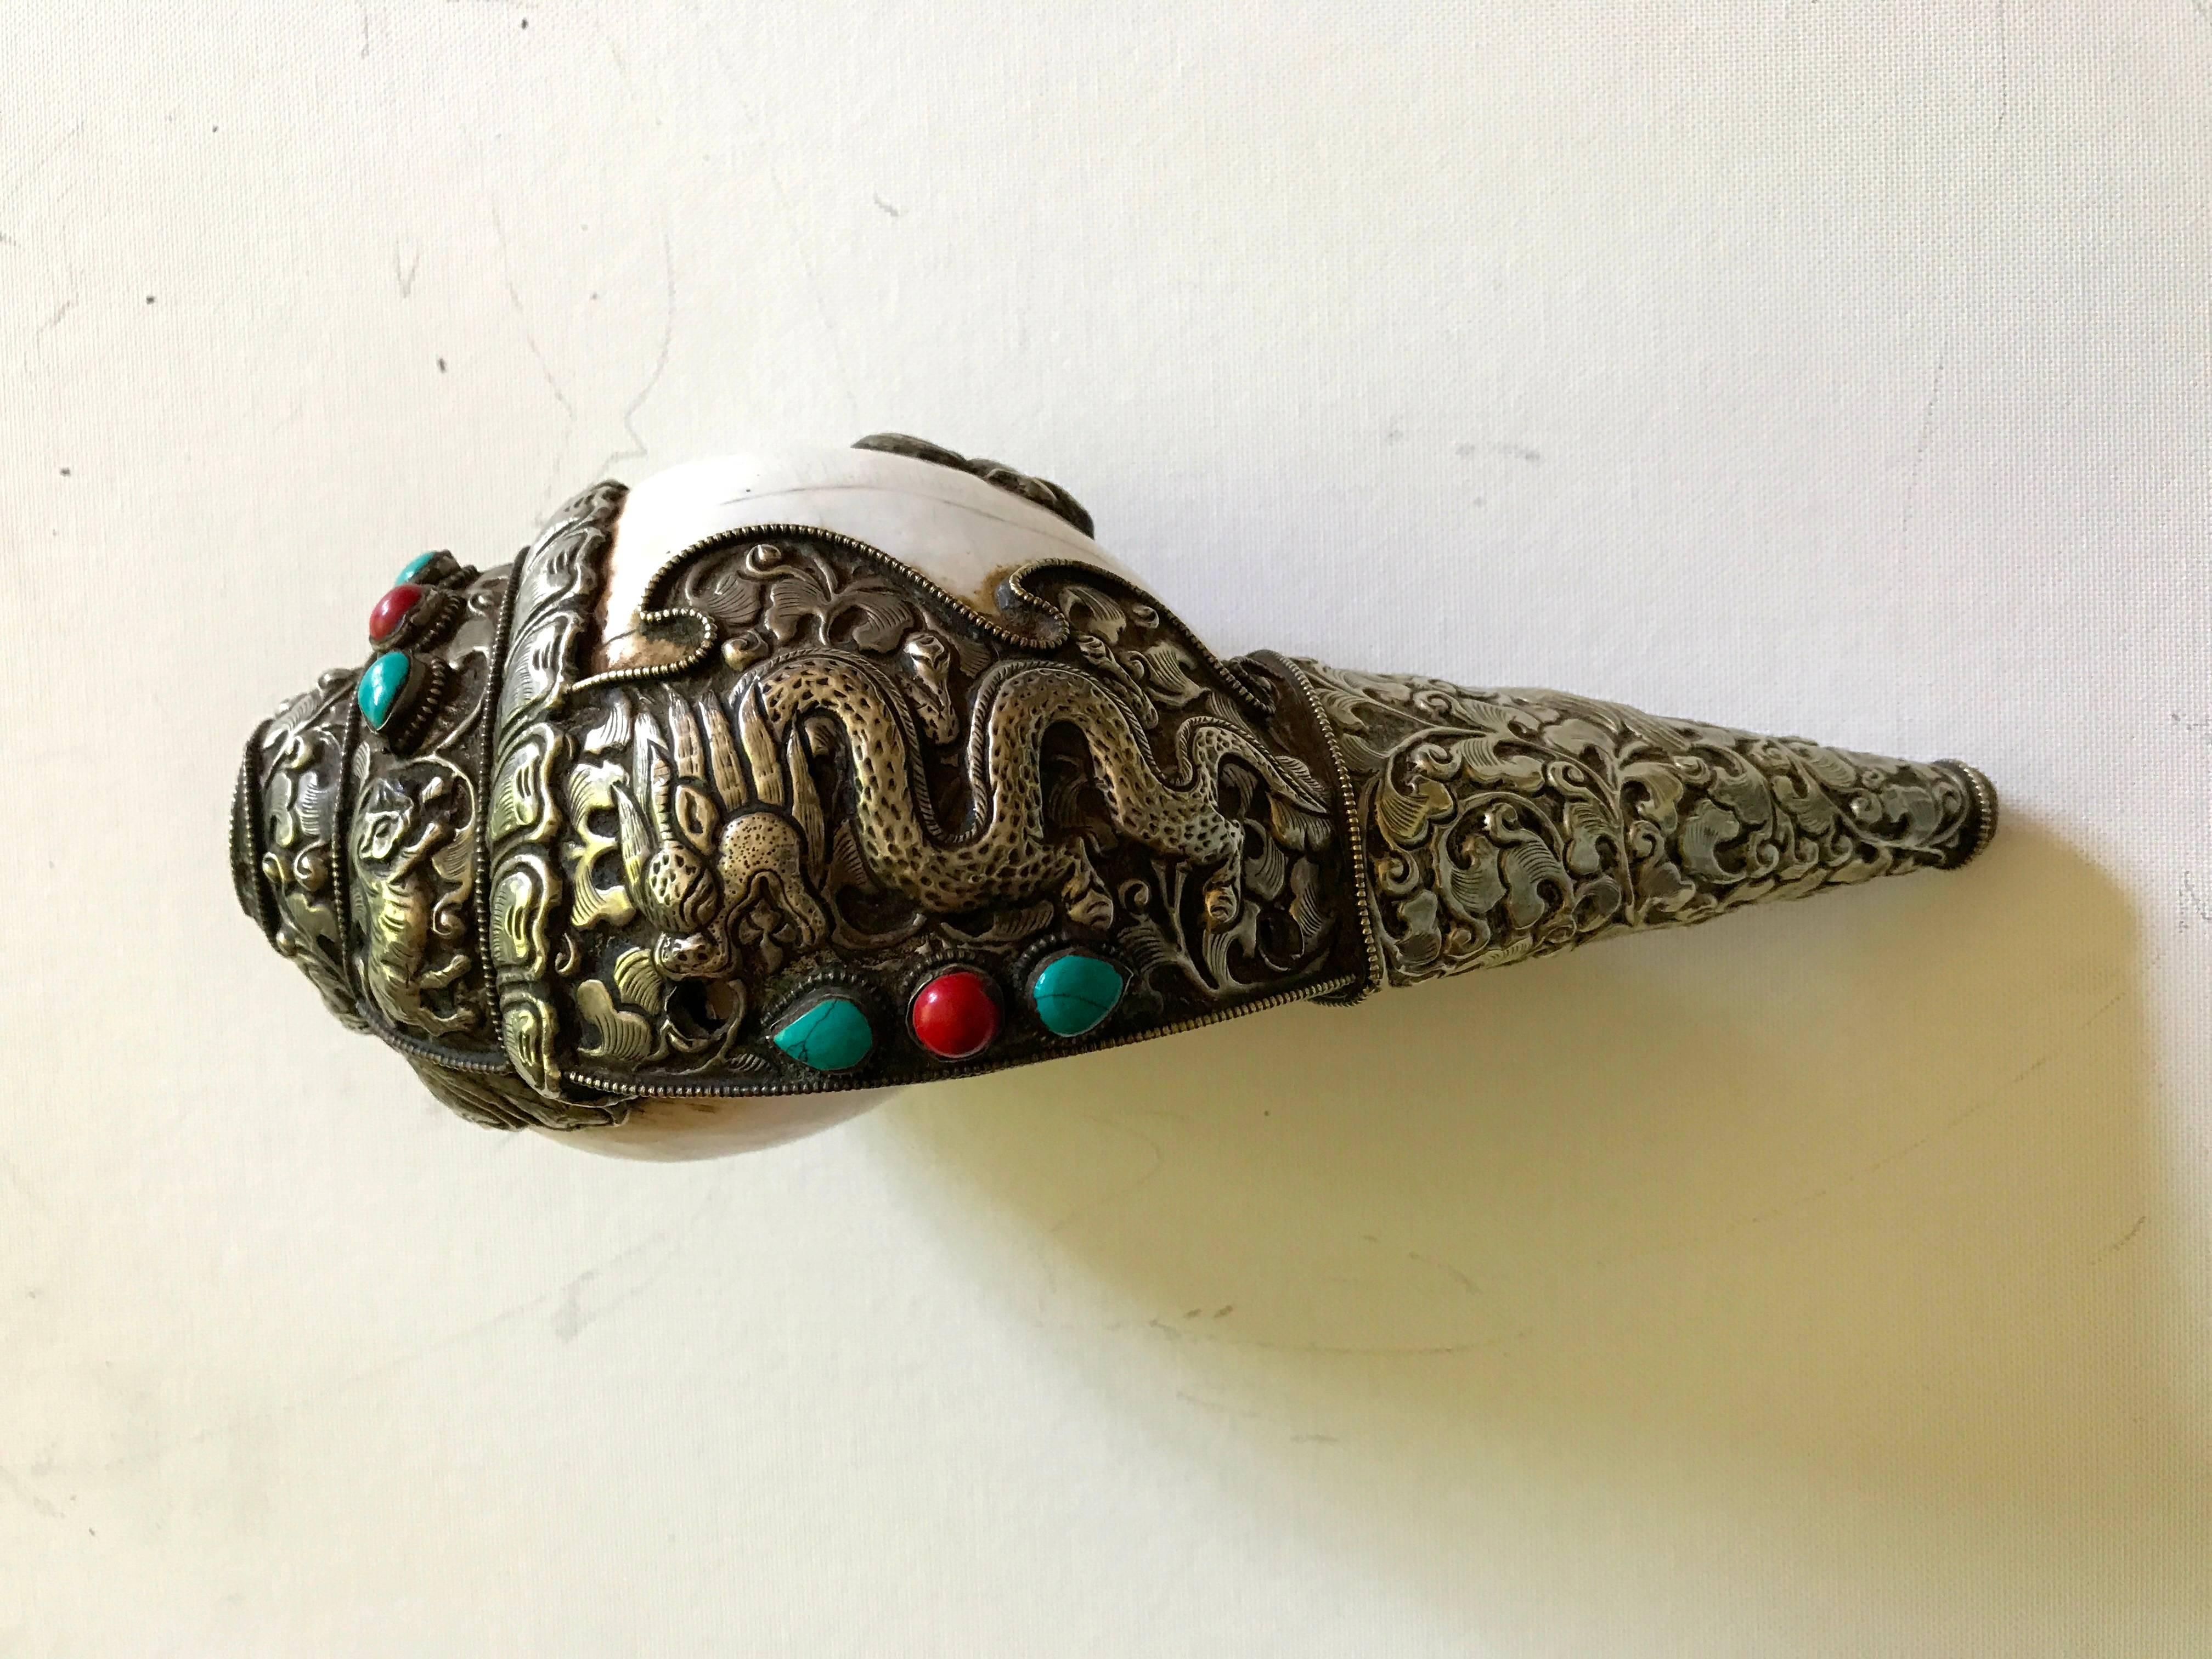 Tibetan Ritual Conch Shell with Silver and Stones For Sale 6